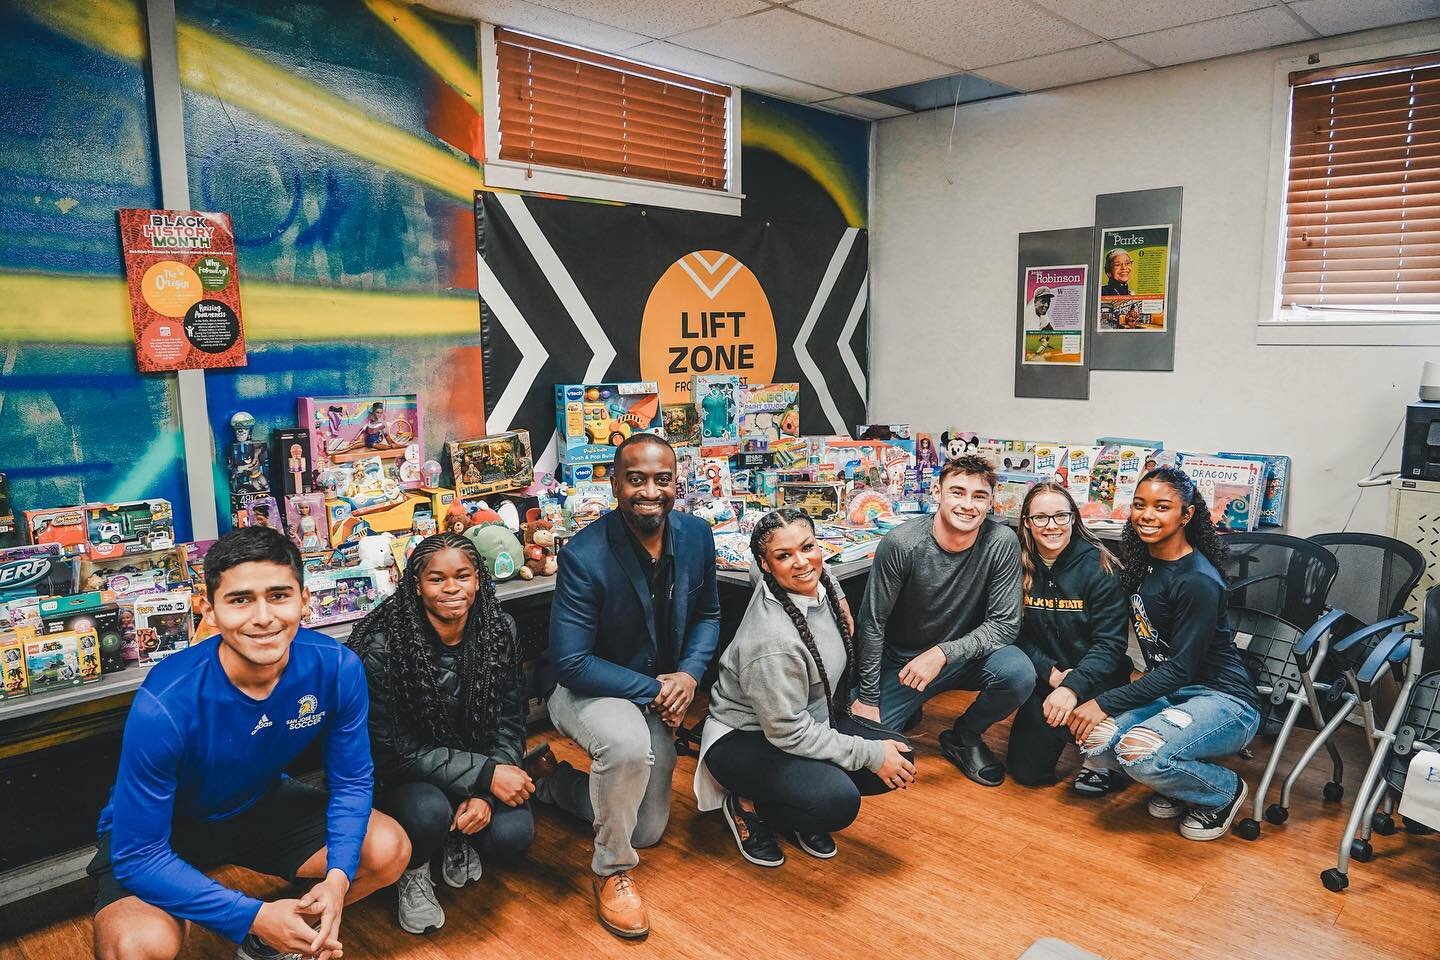 We collected over 370 toys to donate to the African American Community Service Agency!